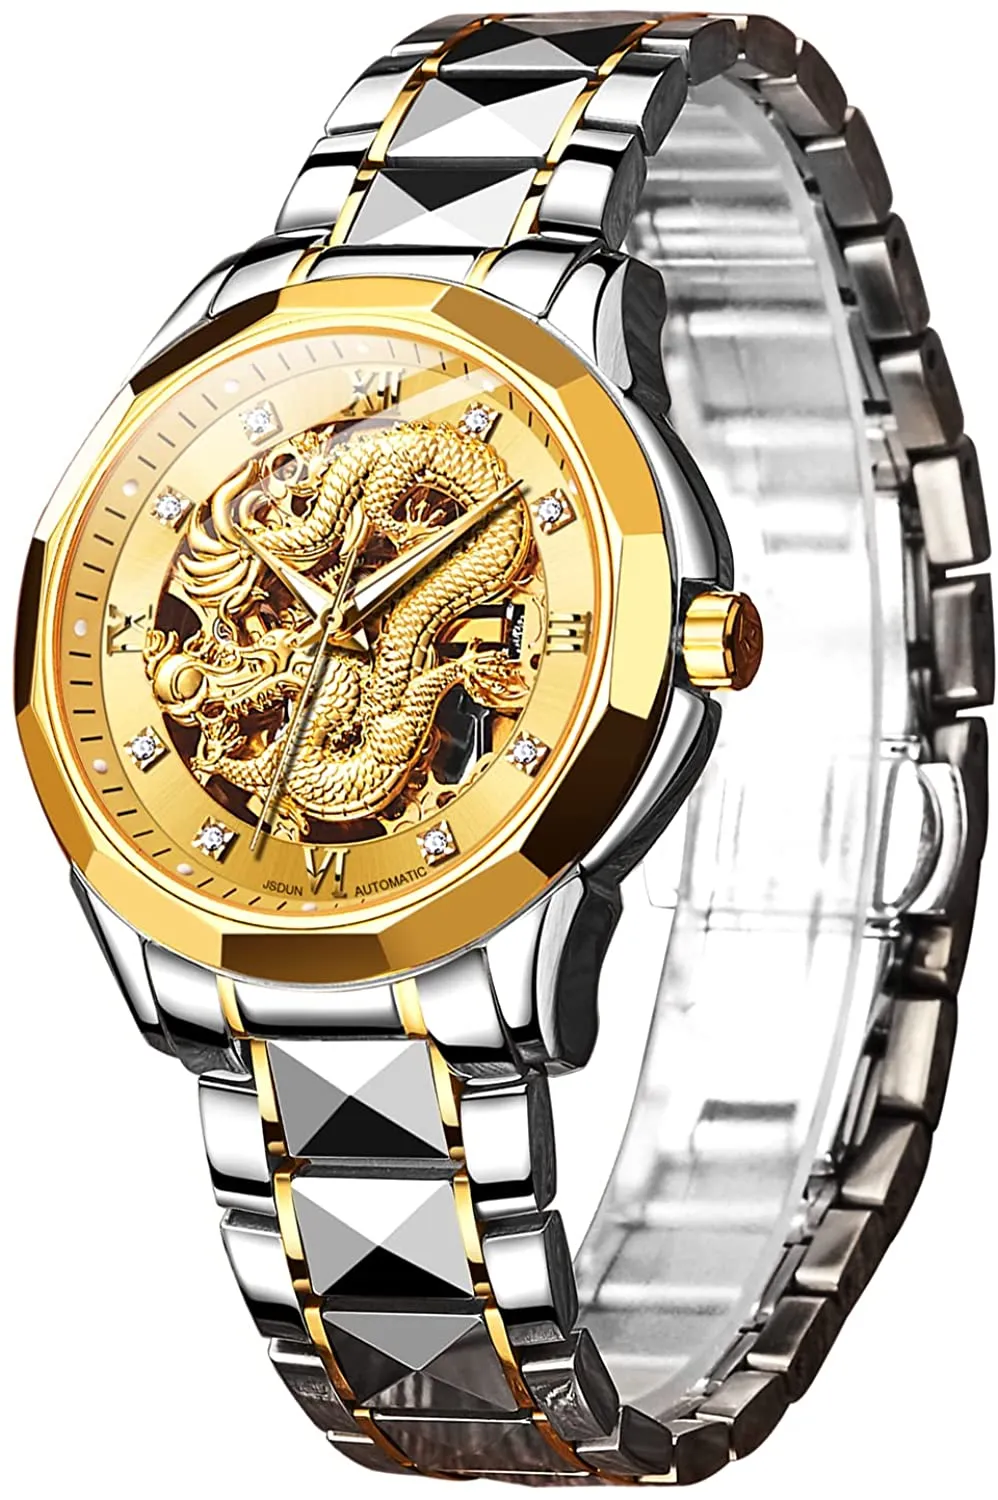 Skeleton Gold Watches for Men Automatic Dragon Mechanical Business Dress with Stainless steel Luminous Waterproof Diamond Fashion WristWatch